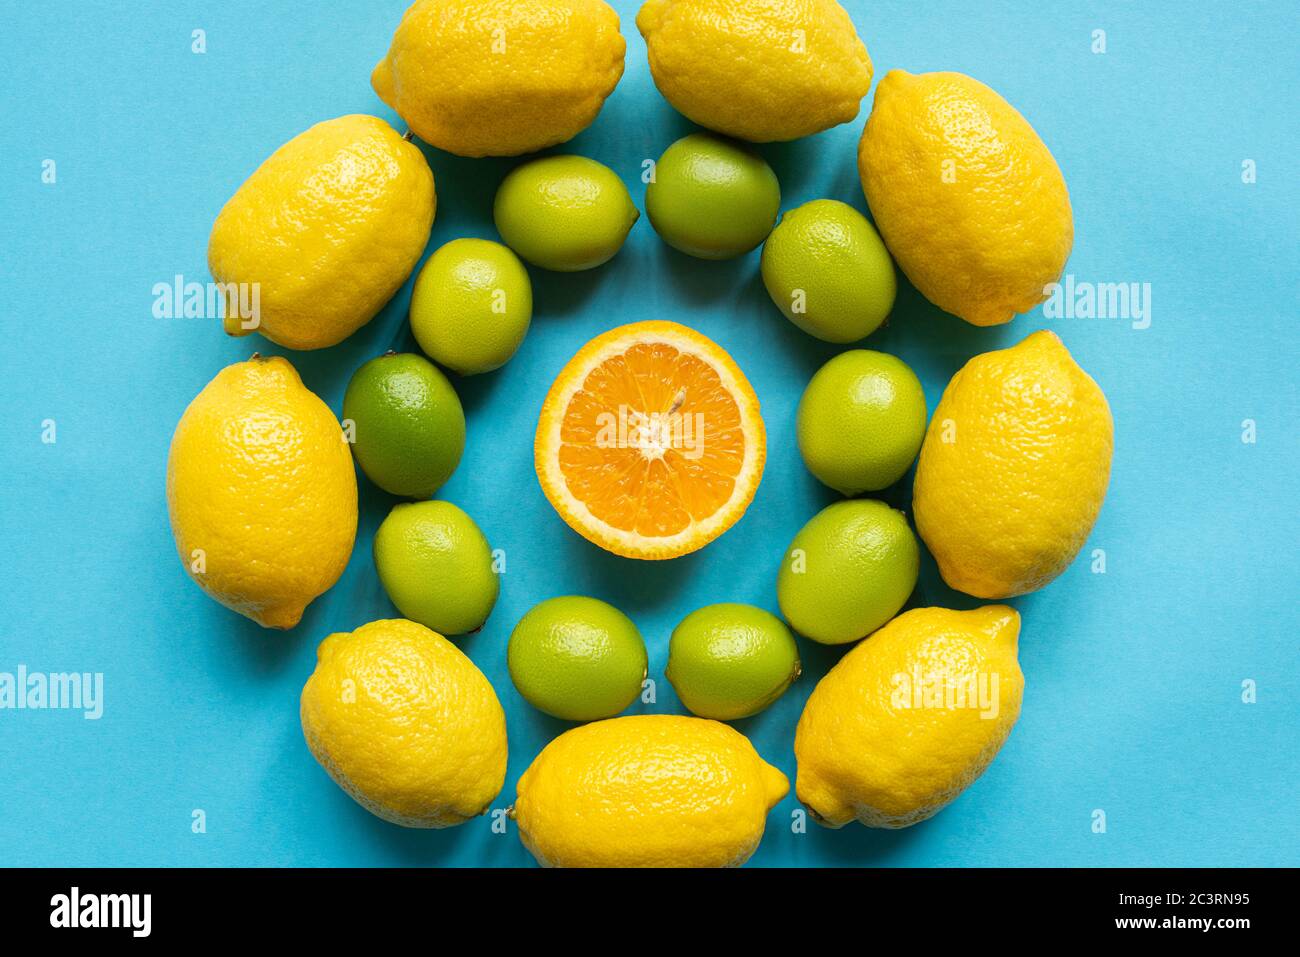 top view of ripe yellow lemons, orange and limes arranged in circles on blue background Stock Photo